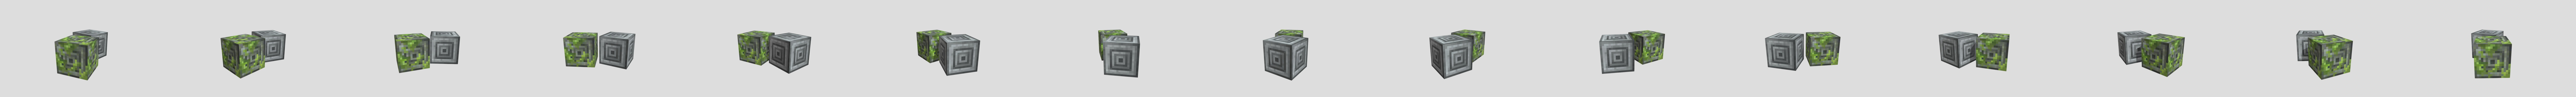 My retexture of Chiseled Stone Bricks - 3D model by LycanStarArt  (@LycanStarArt) [5afb0a8]